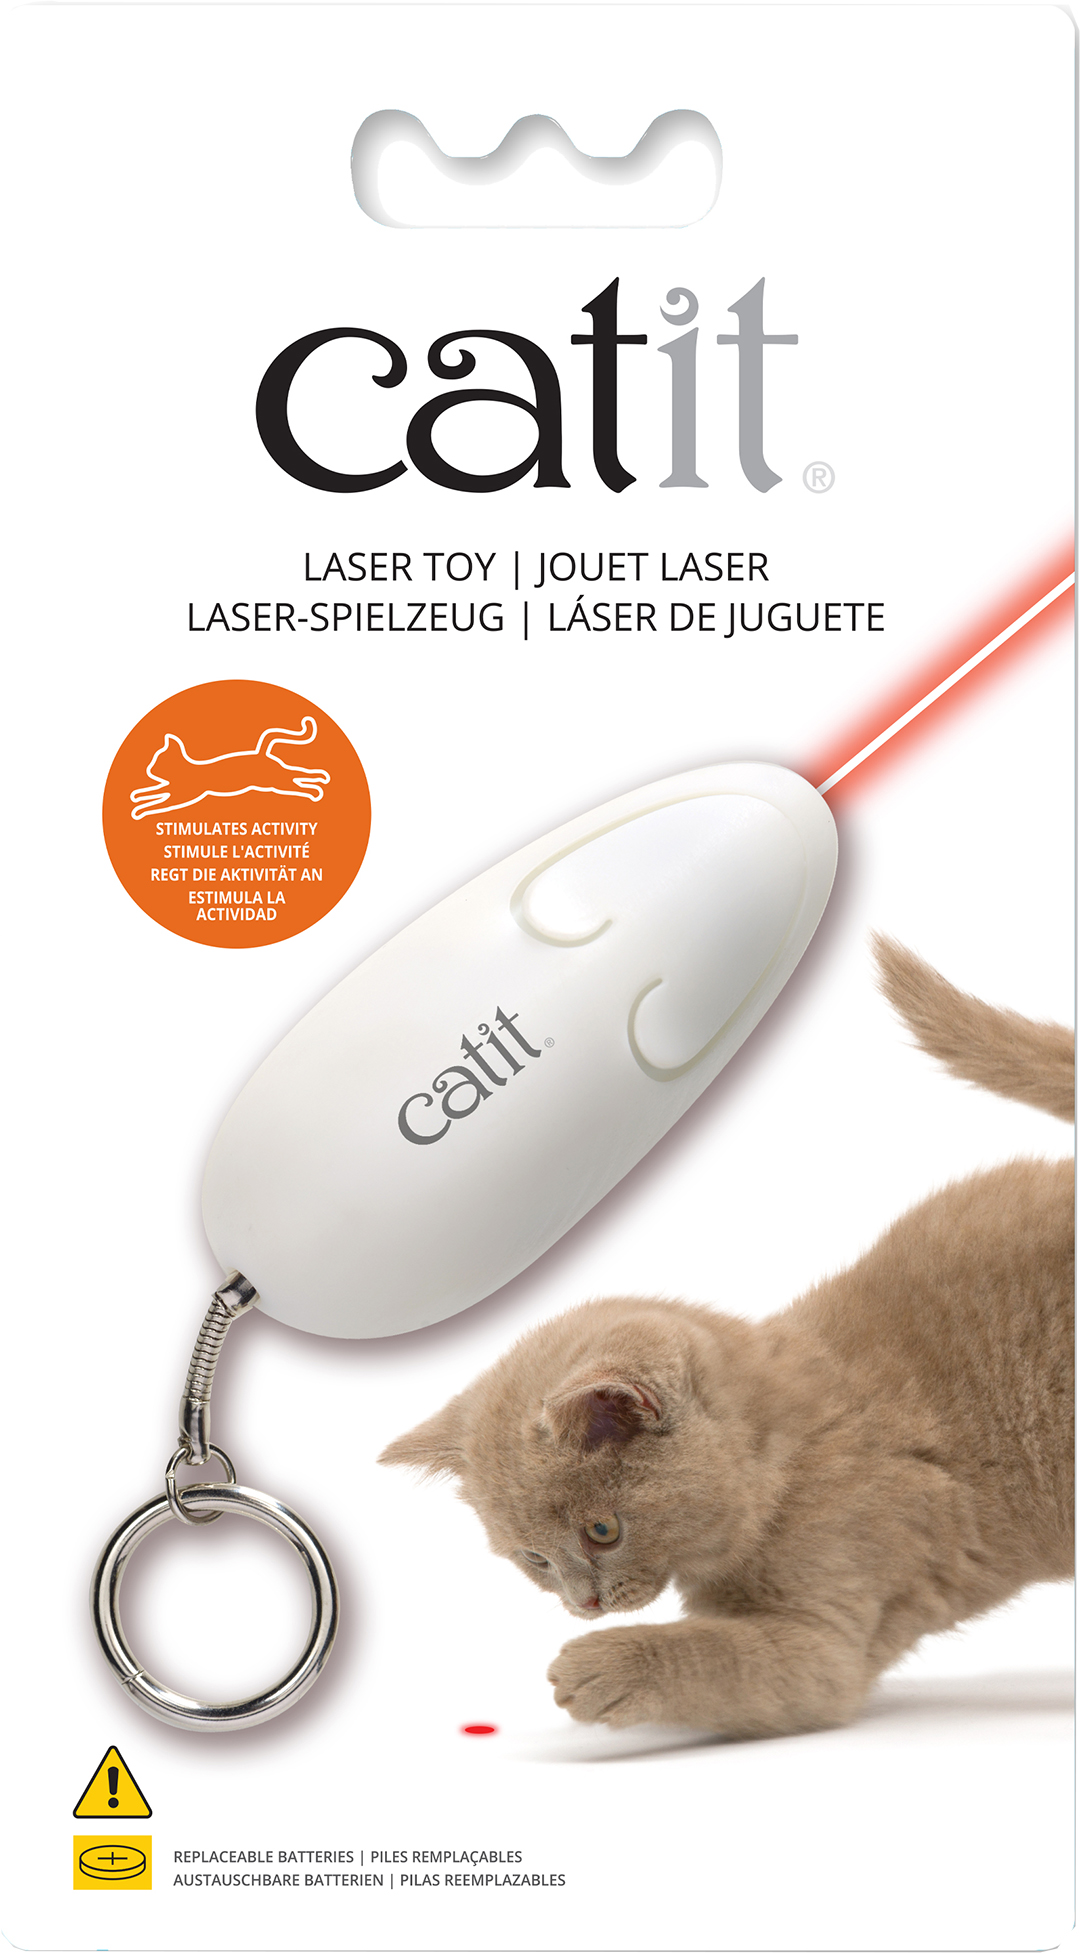 Ca 2.0 laser mouse toy white - Product shot